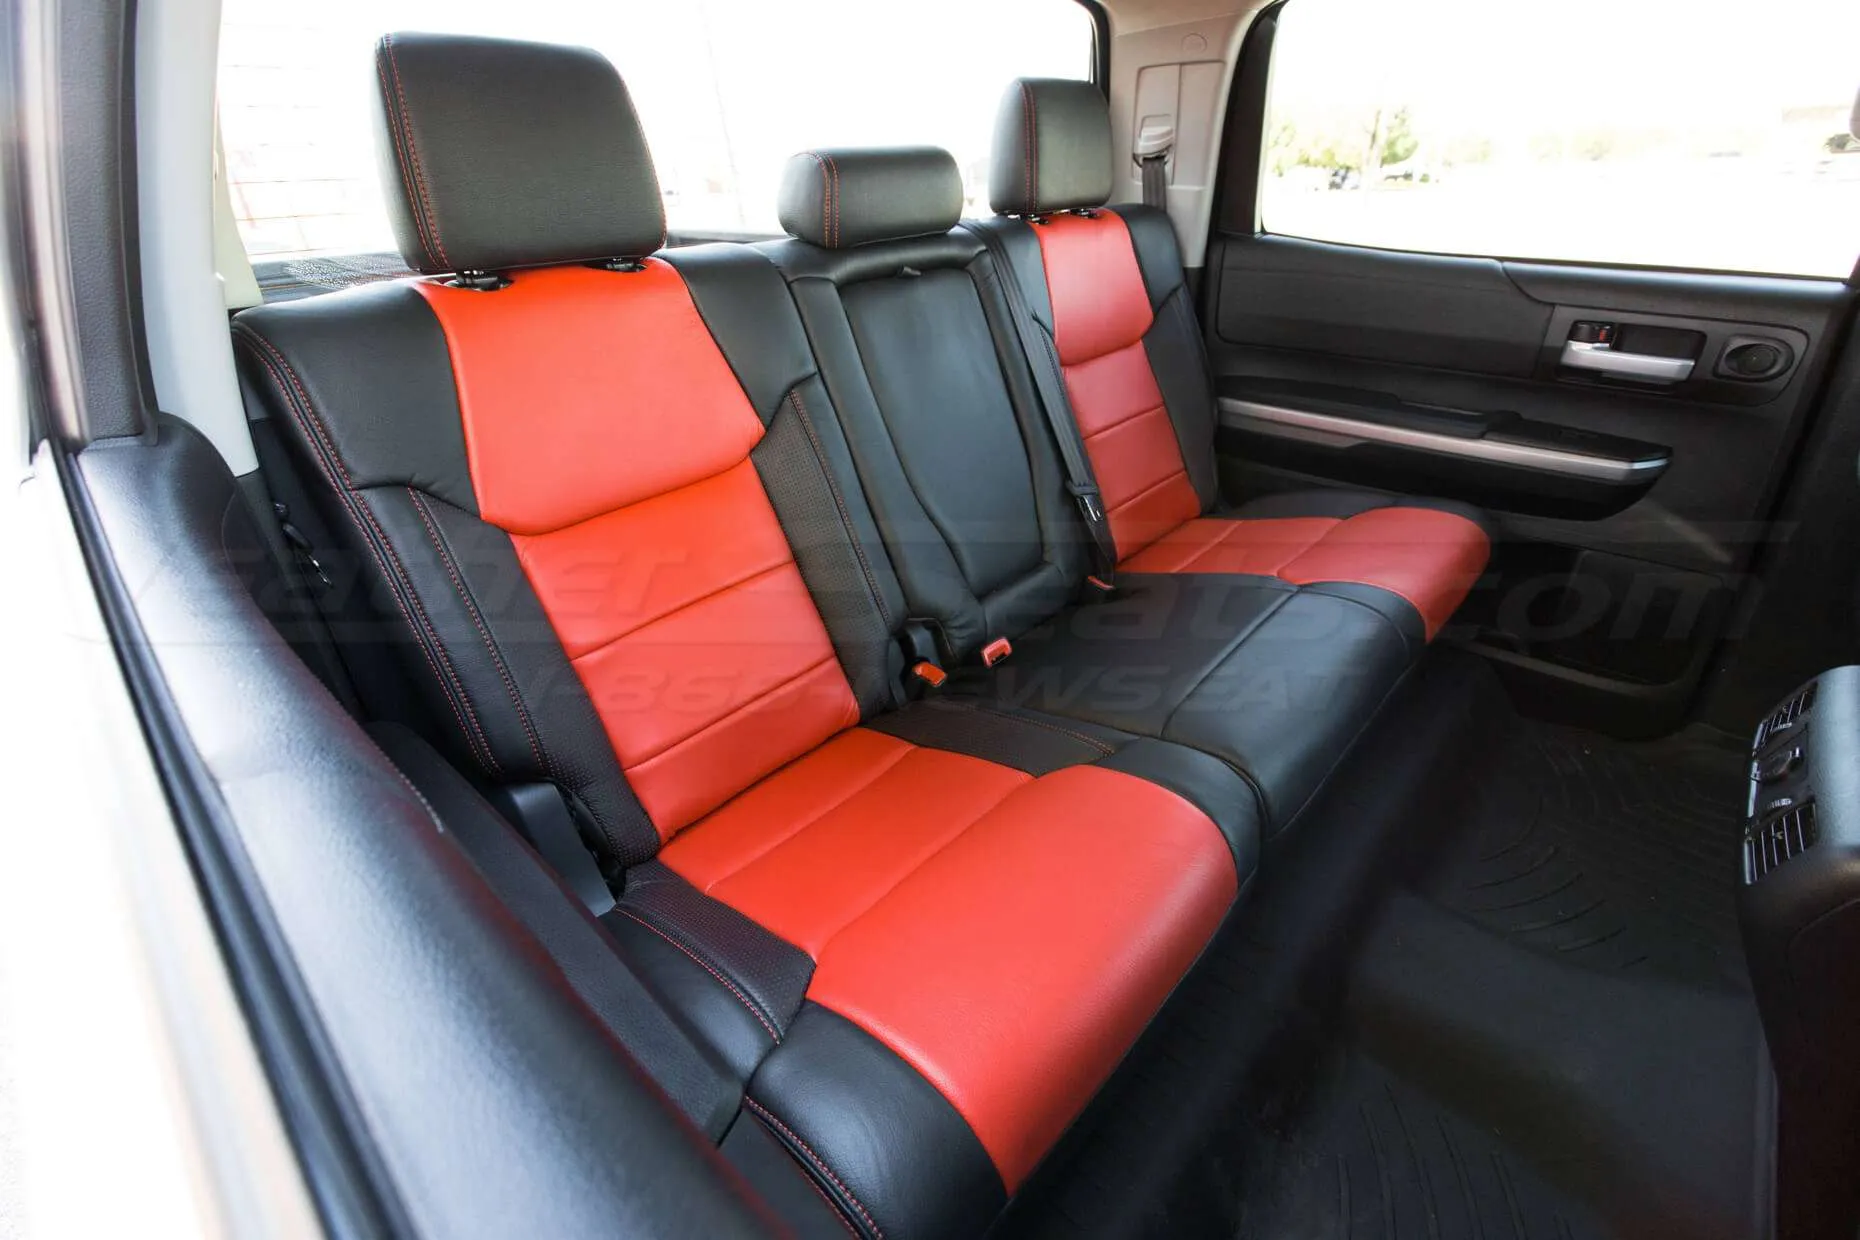 Toyota Tundra Leather Kit Installed - Black & Bright Red - Rear seats from passenger side